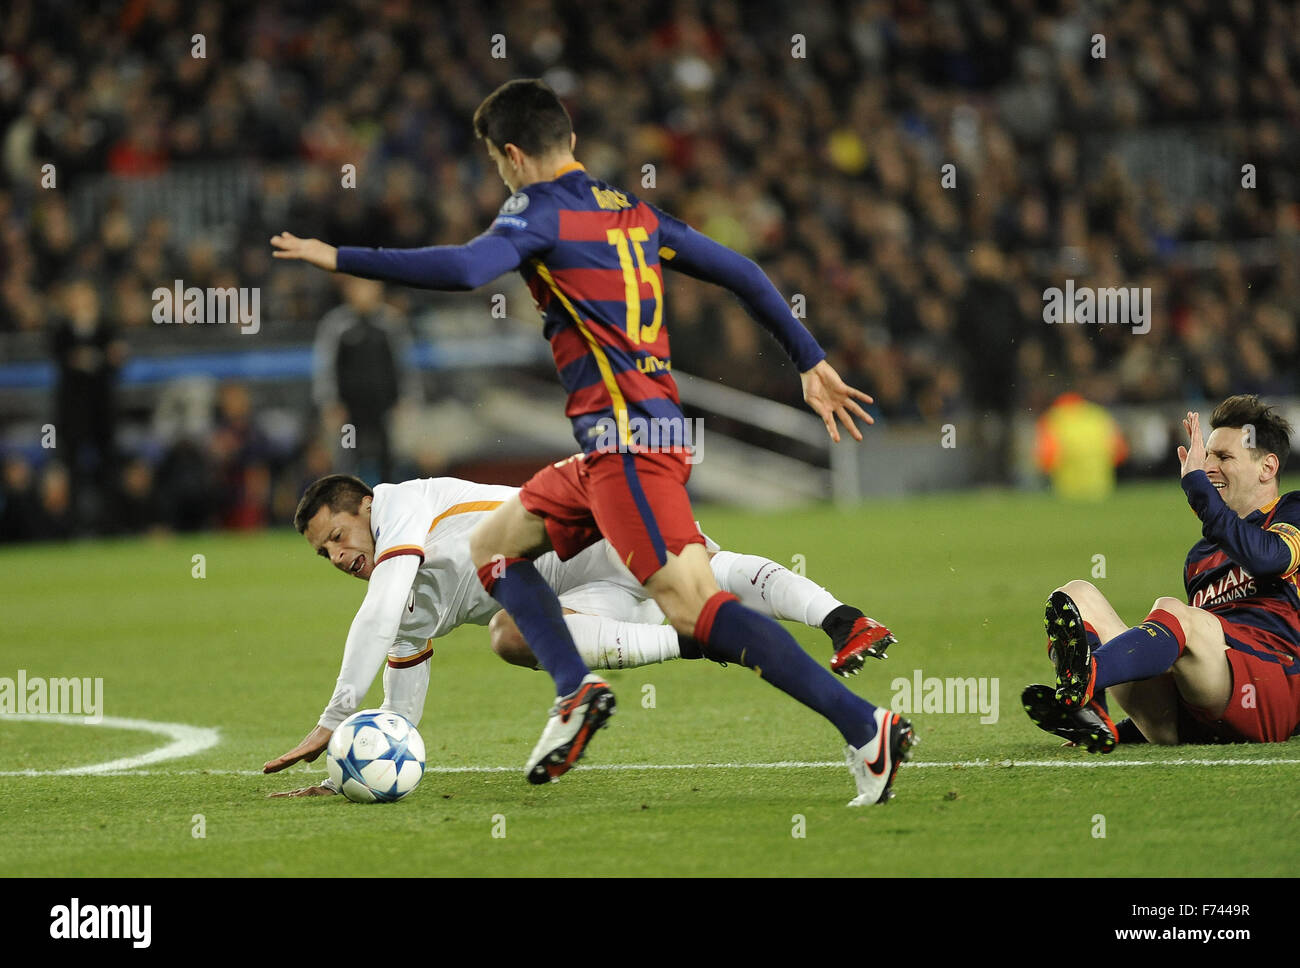 Soccer UEFA Champions Leage Group E match FC Barcelona against AS Roma played at Camp Nou stadium in Barcelona, Catalonia, Spain on 24 November 2015. FC Barcelona's Spanish player Marc Barta (front) fights for the ball with a player of AS Roma. Argentinian striker Lionel Messi (R) looks on. Foto: Stefano Gnech/dpa Stock Photo